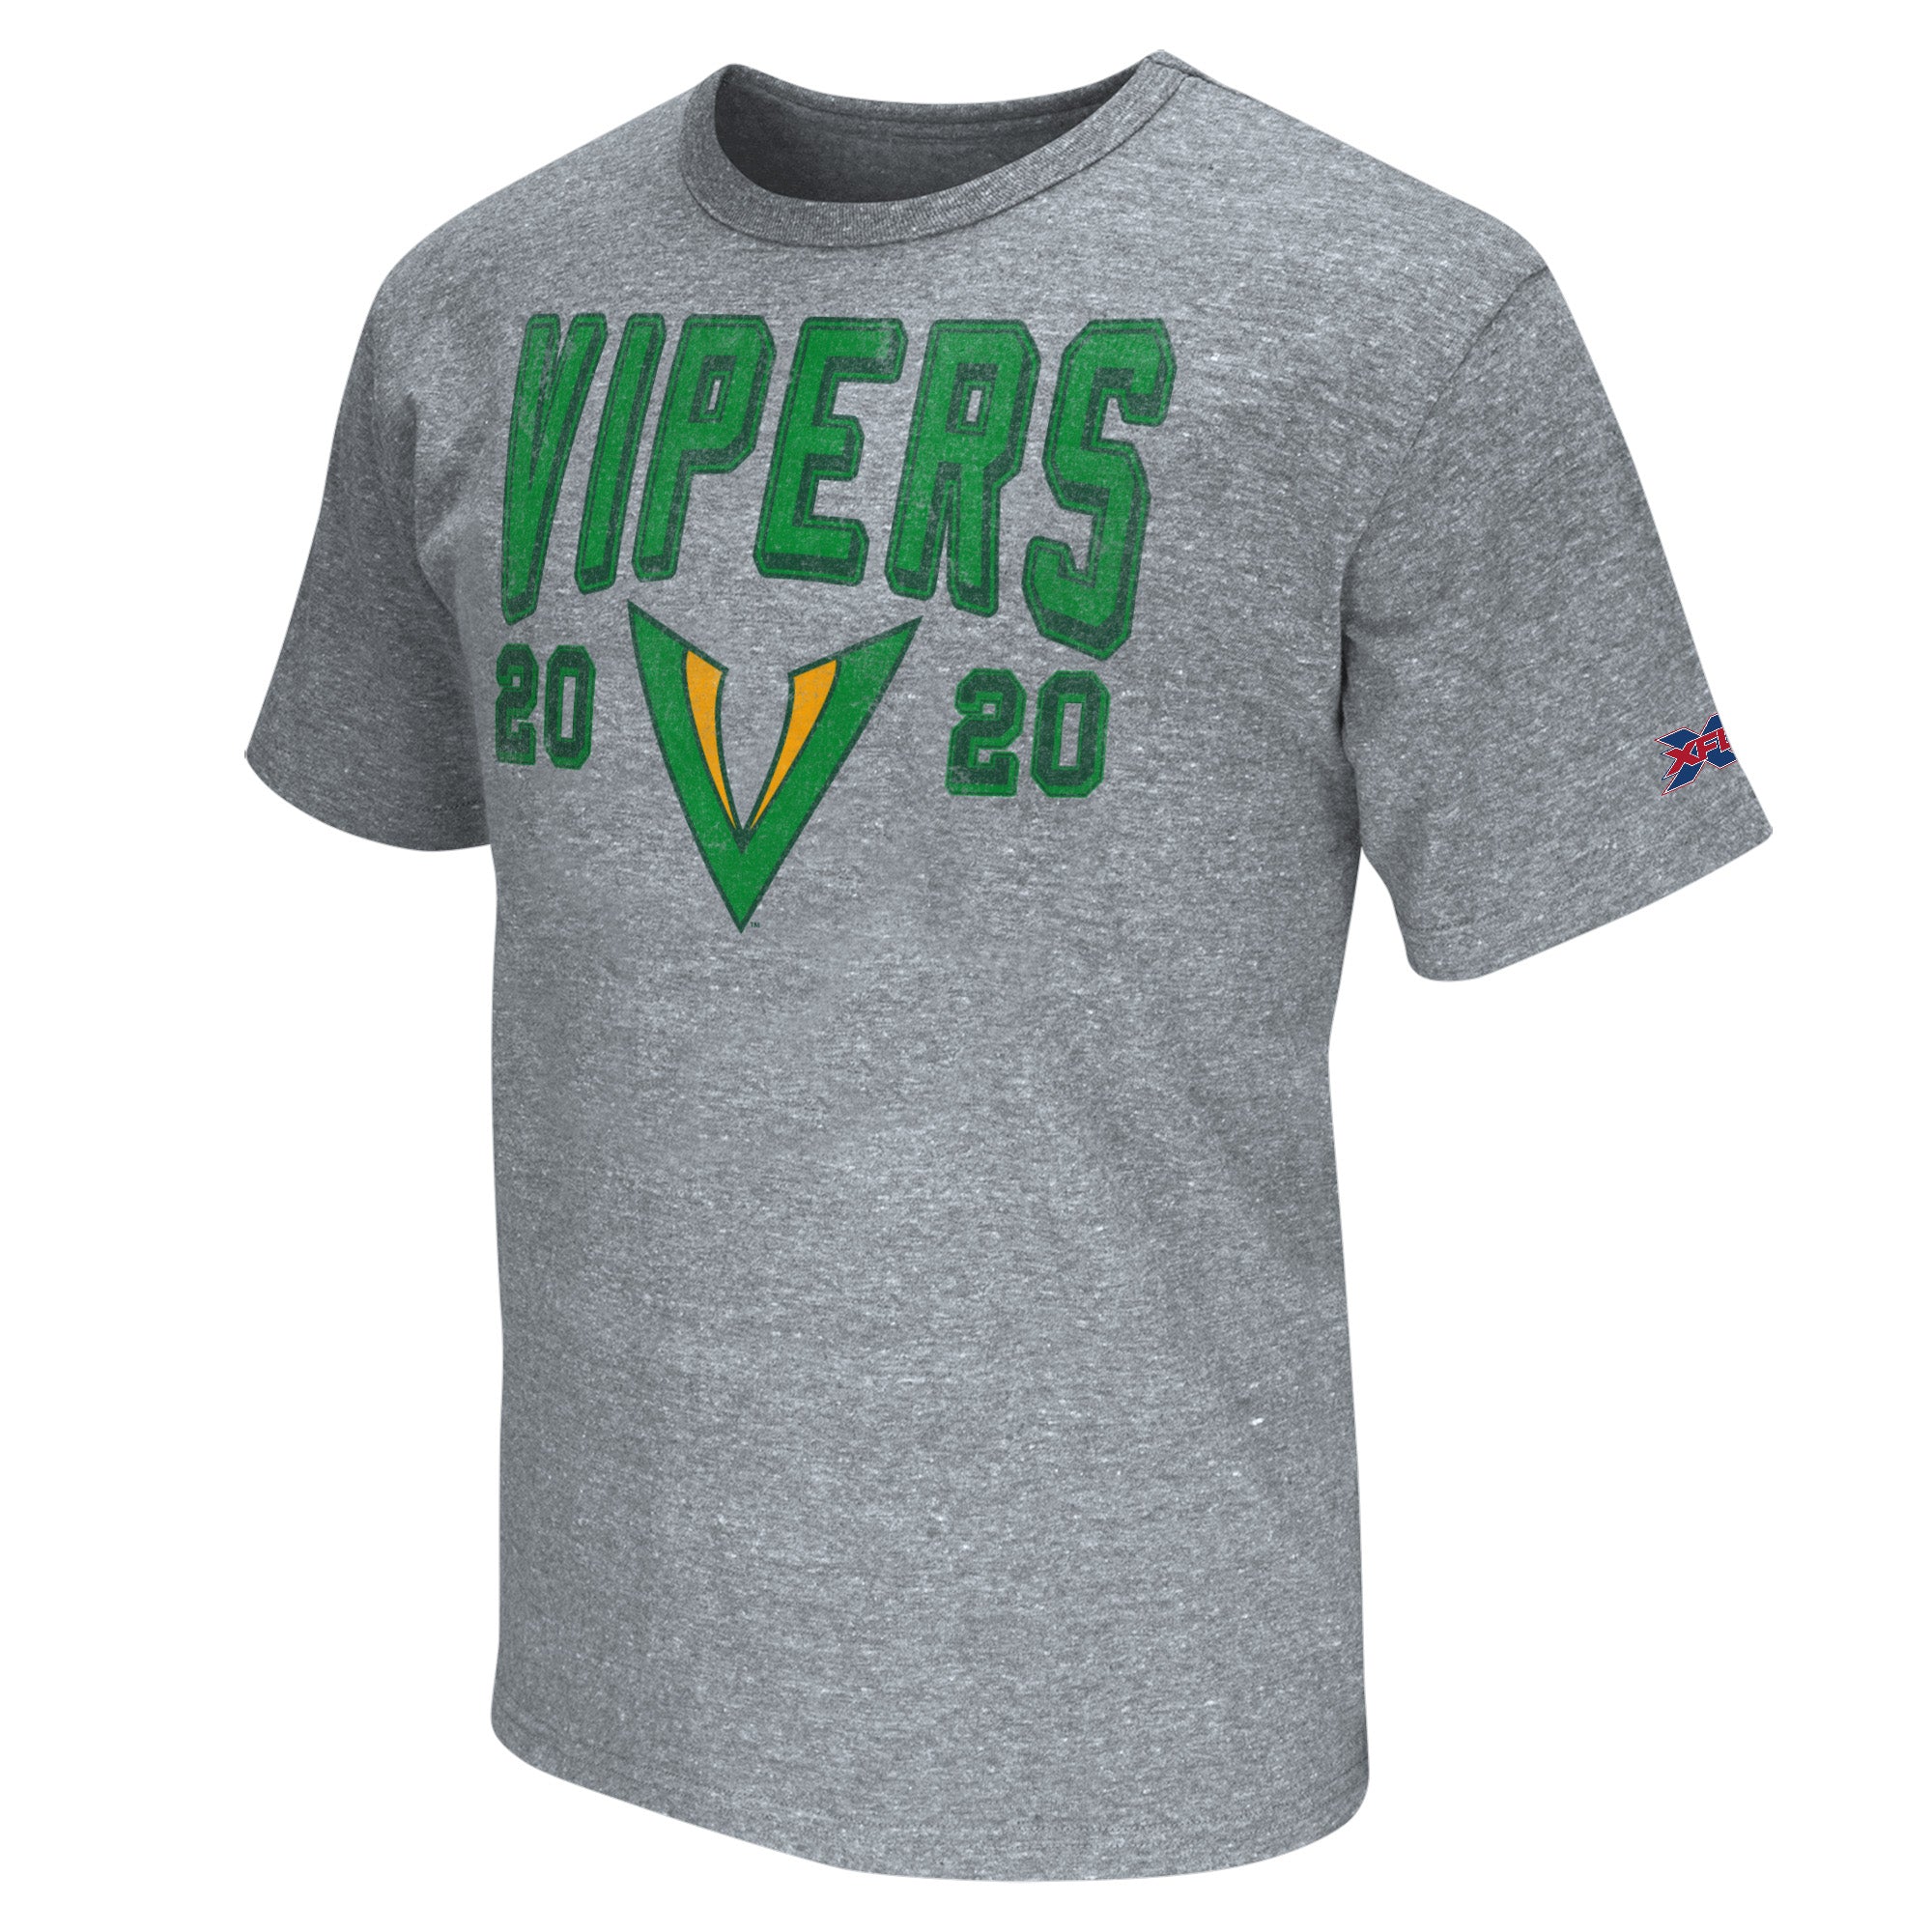 tampa vipers jersey